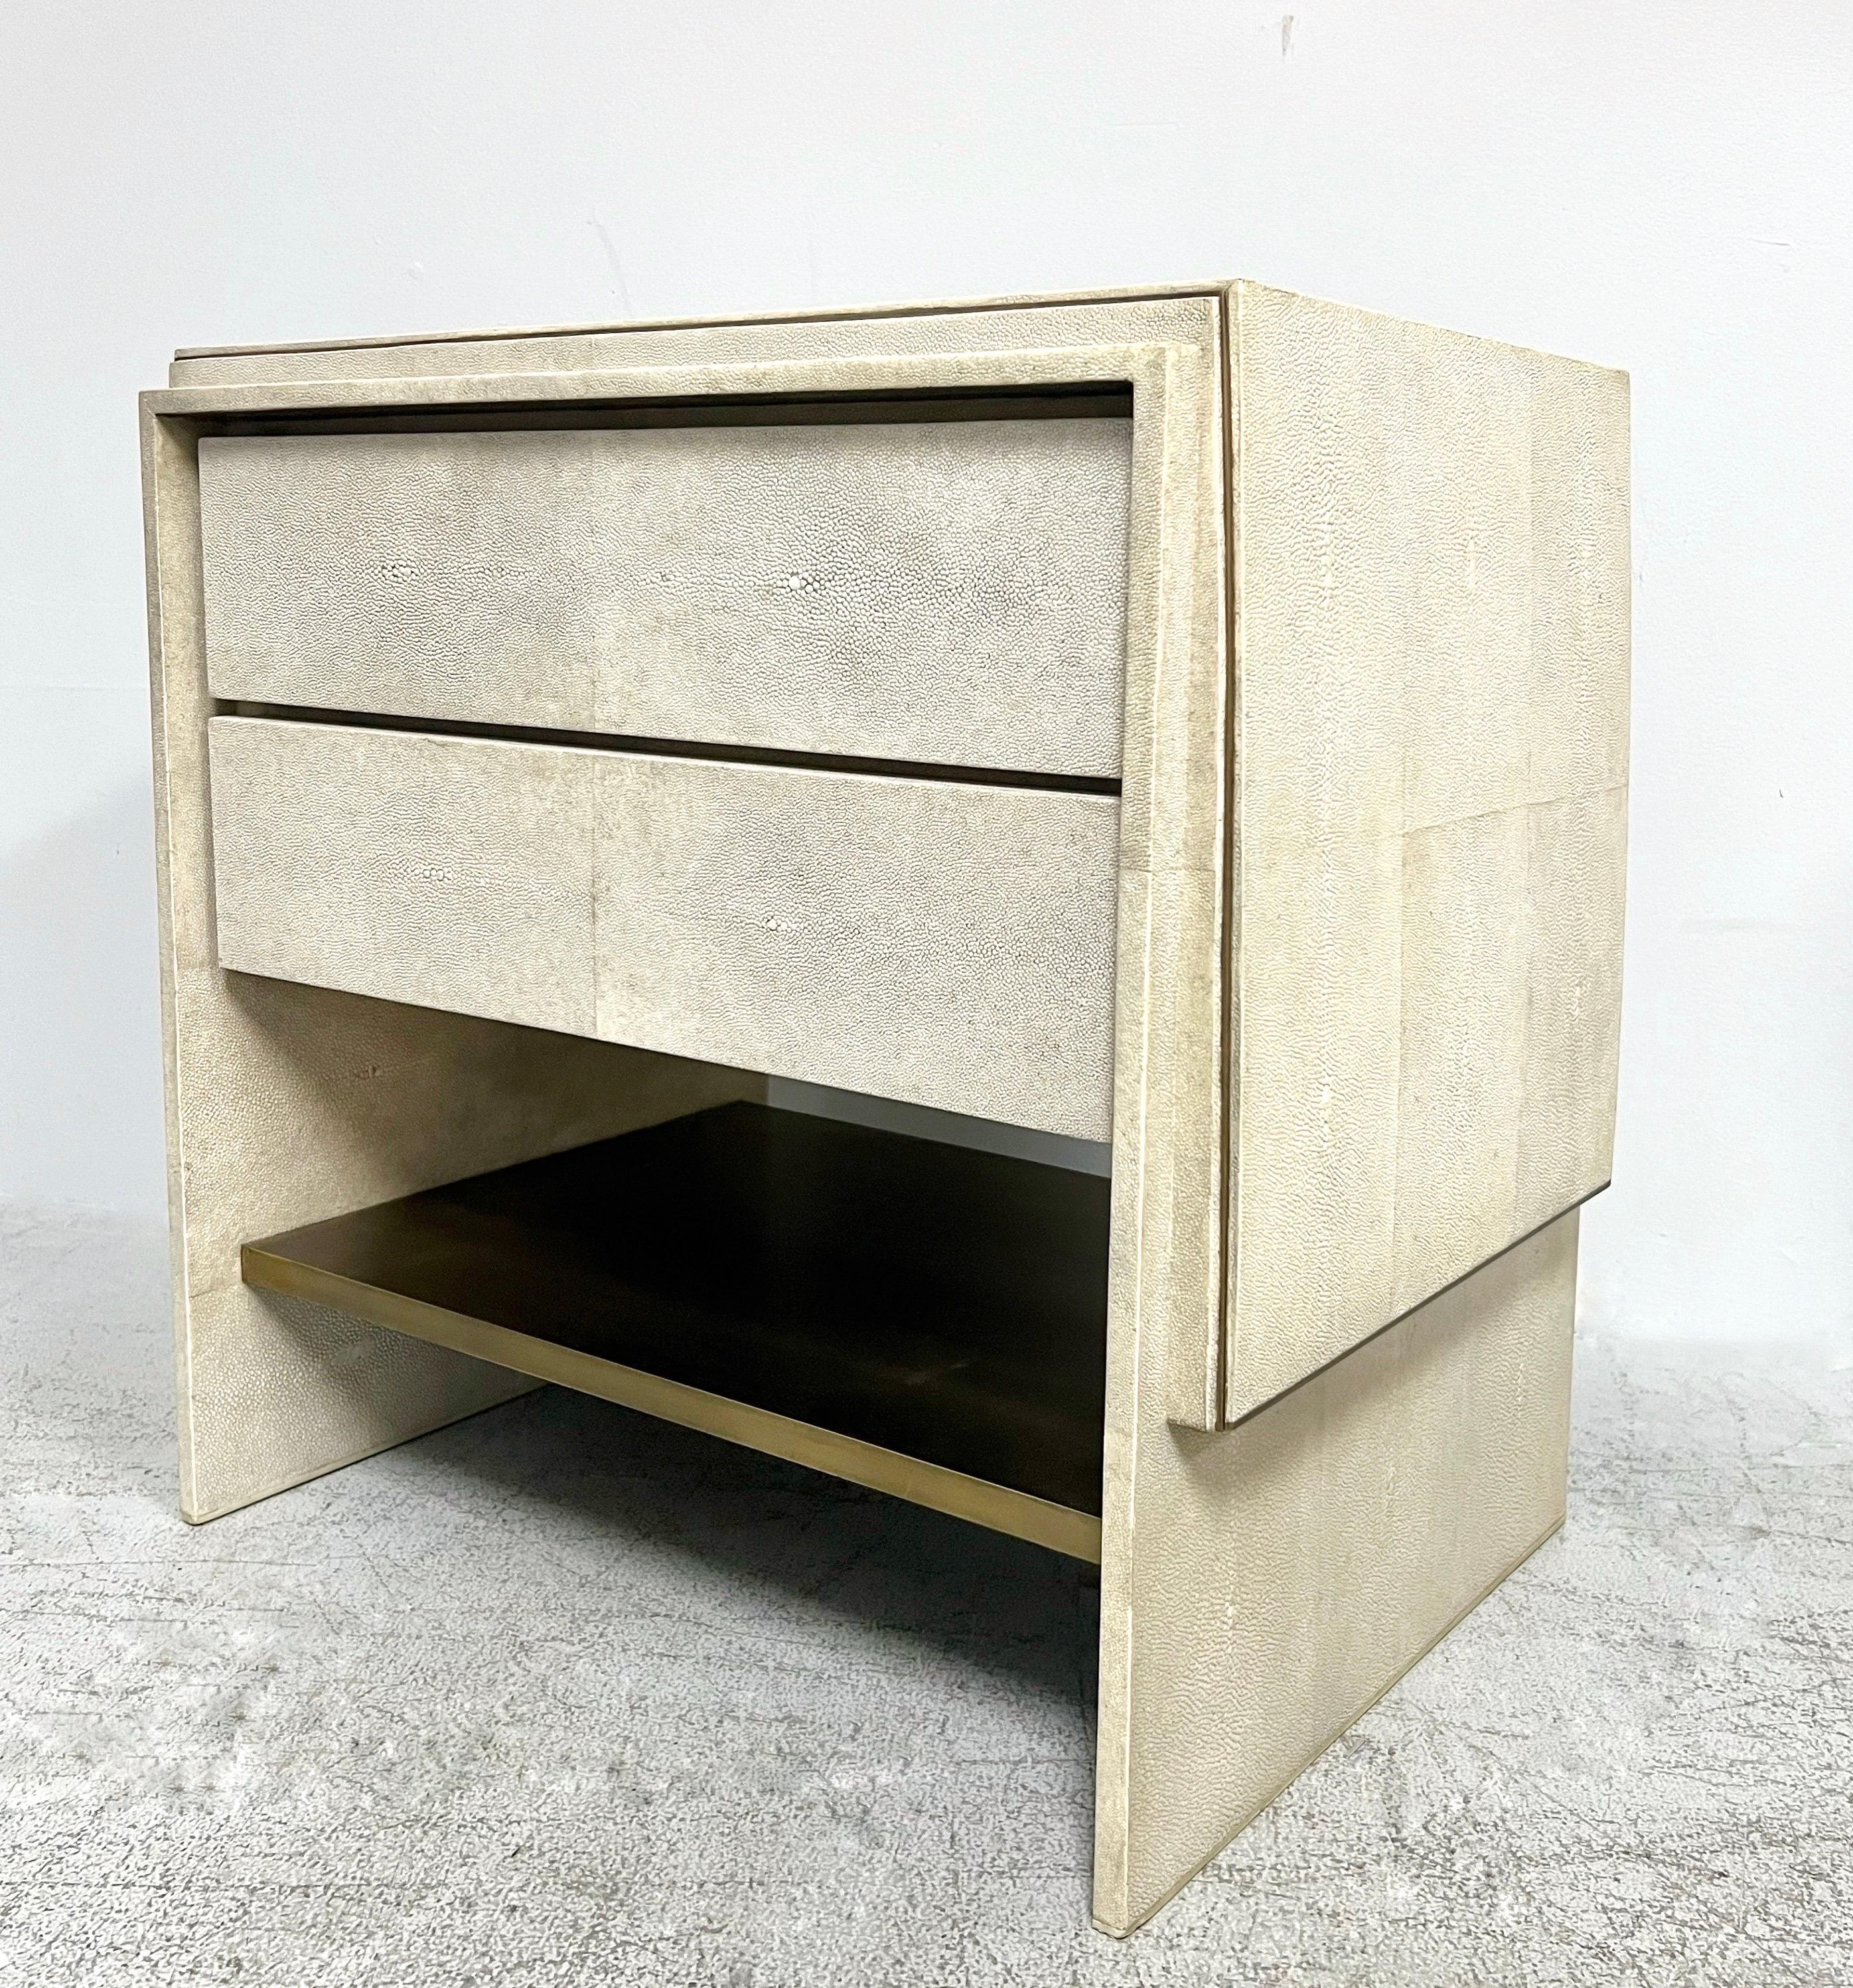 A single bedside table in cream shagreen and bronze by R$Y Augosti. Two drawers and a bronze shelf. Bronze detail on edges. Signed with plaque on underside of shelf.